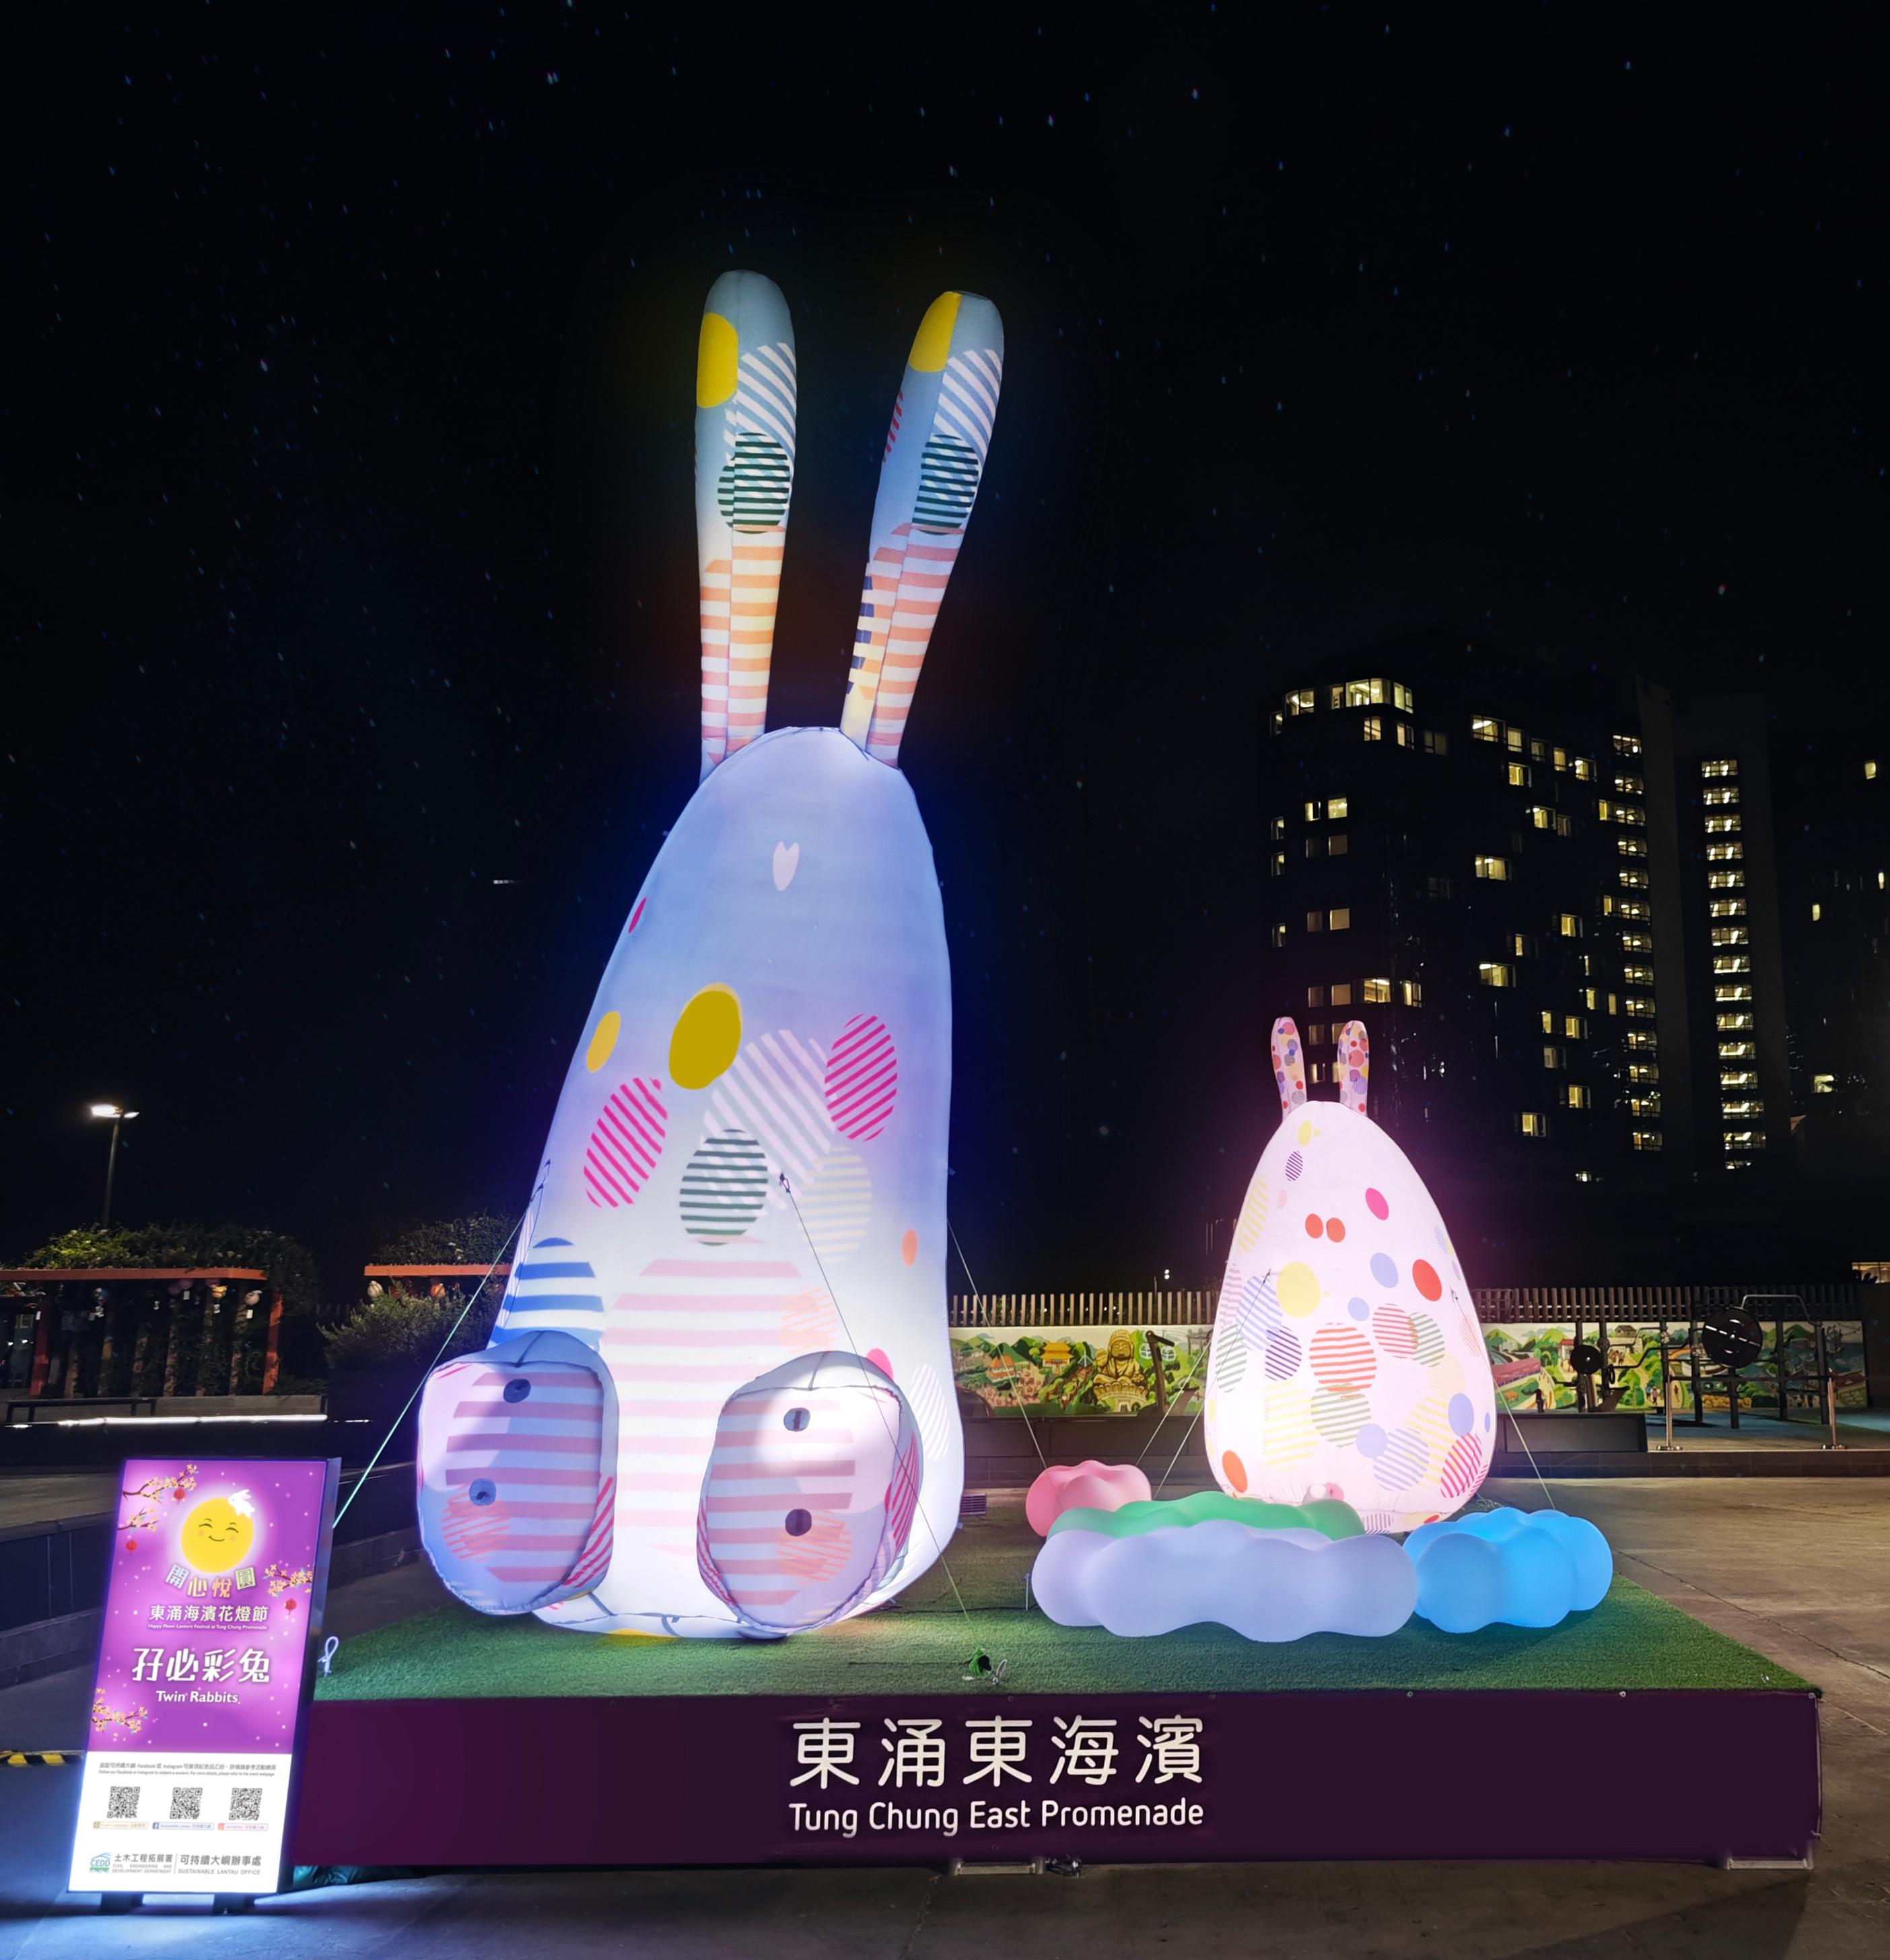 The Sustainable Lantau Office under the Civil Engineering and Development Department and the Islands District Office will organise the Happy Moon Lantern Festival at Tung Chung East Promenade from tomorrow (September 23) to October 8. Photo shows the "twin rabbits".